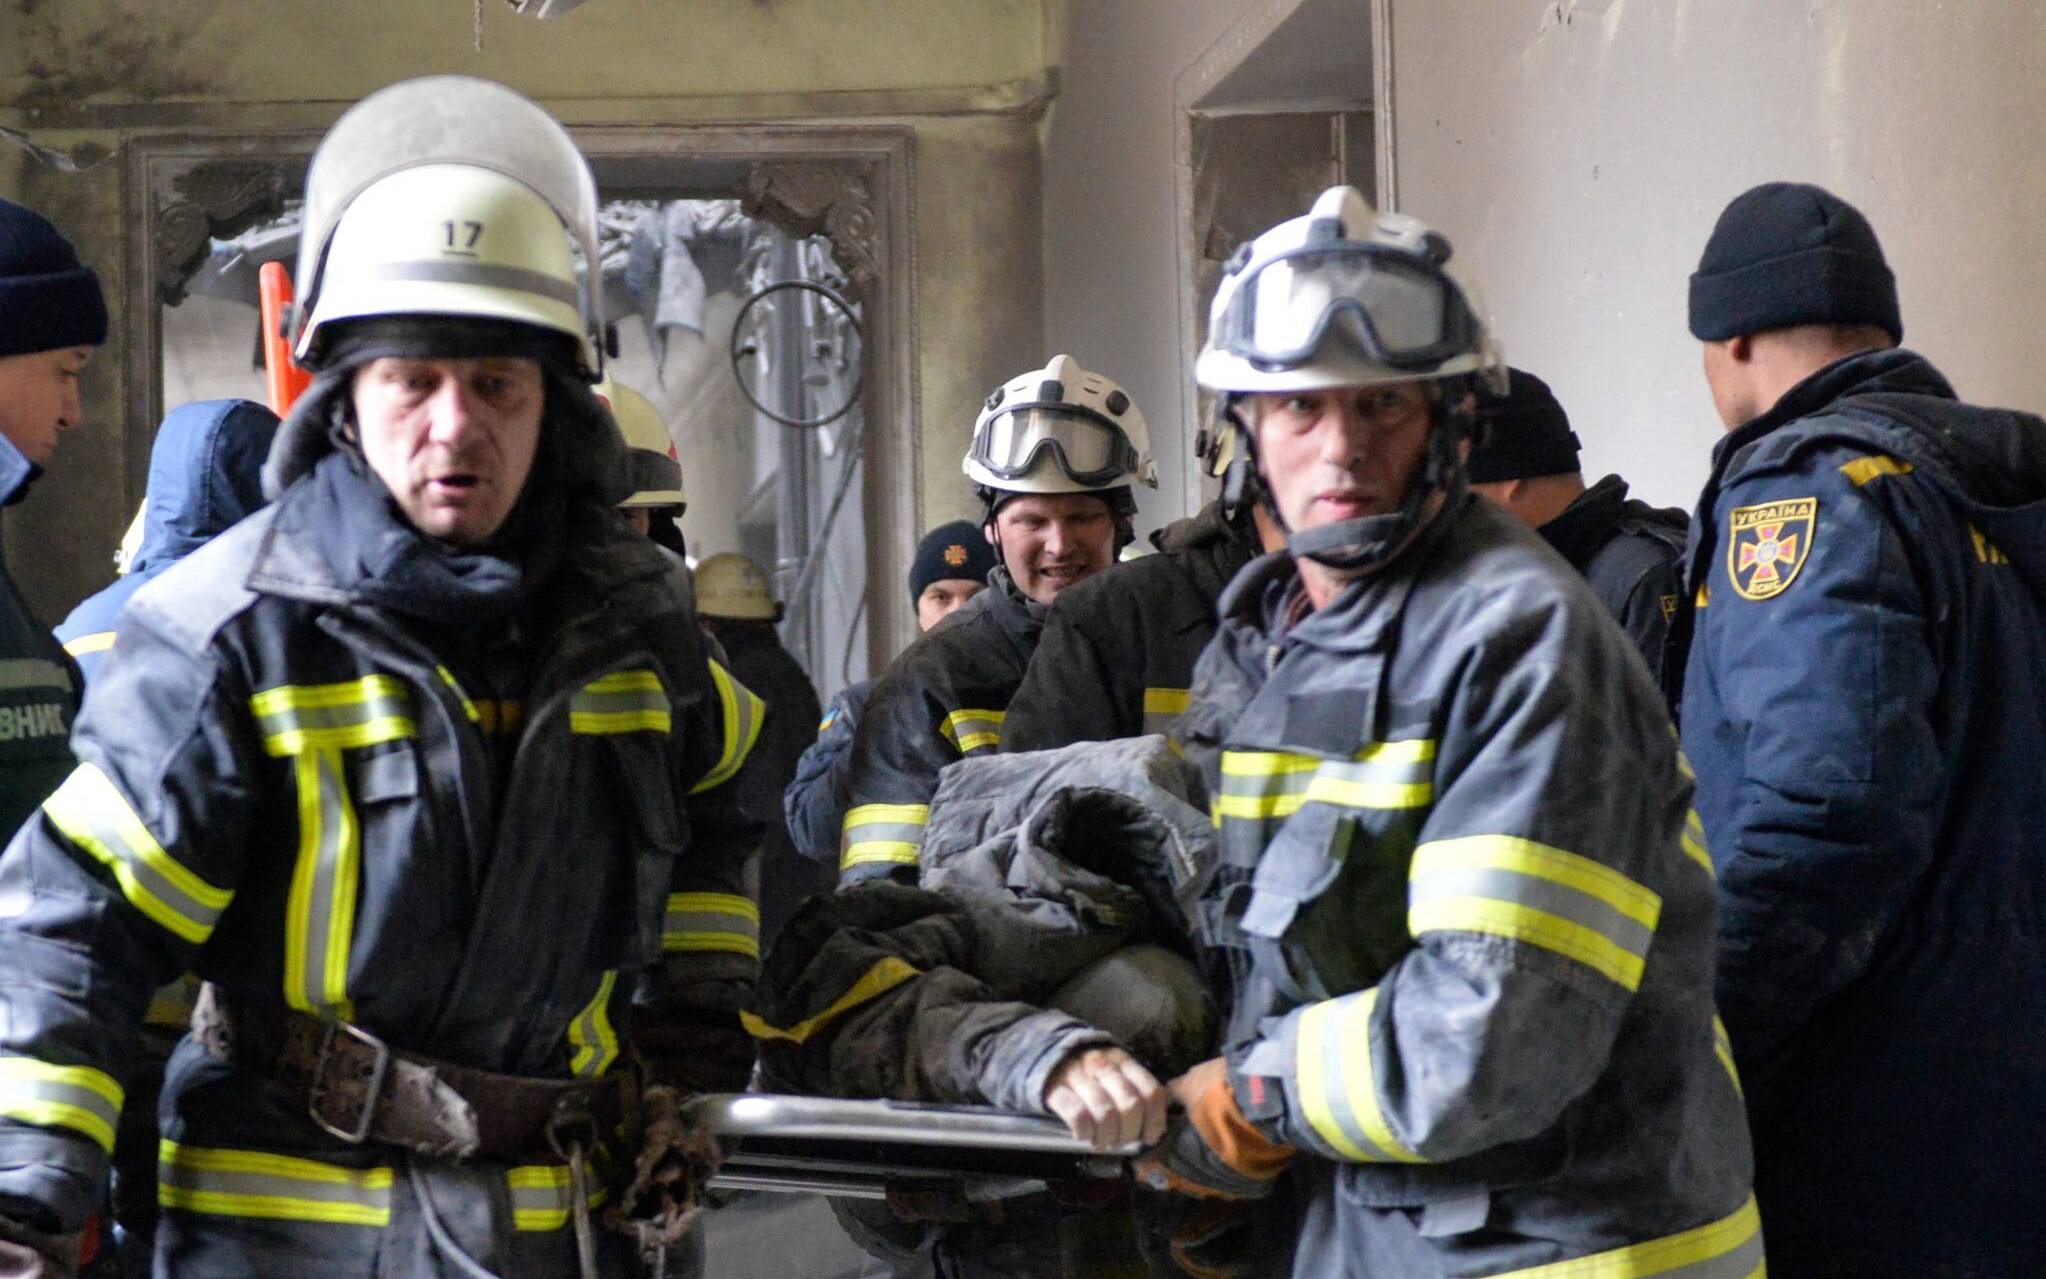 Emergencies personnel carry the body out of the damaged local city hall of Kharkiv on March 1, 2022, destroyed as a result of Russian troop shelling. - The central square of Ukraine's second city, Kharkiv, was shelled by advancing Russian forces who hit the building of the local administration, regional governor Oleg Sinegubov said. Kharkiv, a largely Russian-speaking city near the Russian border, has a population of around 1.4 million. (Photo by Sergey BOBOK / AFP)